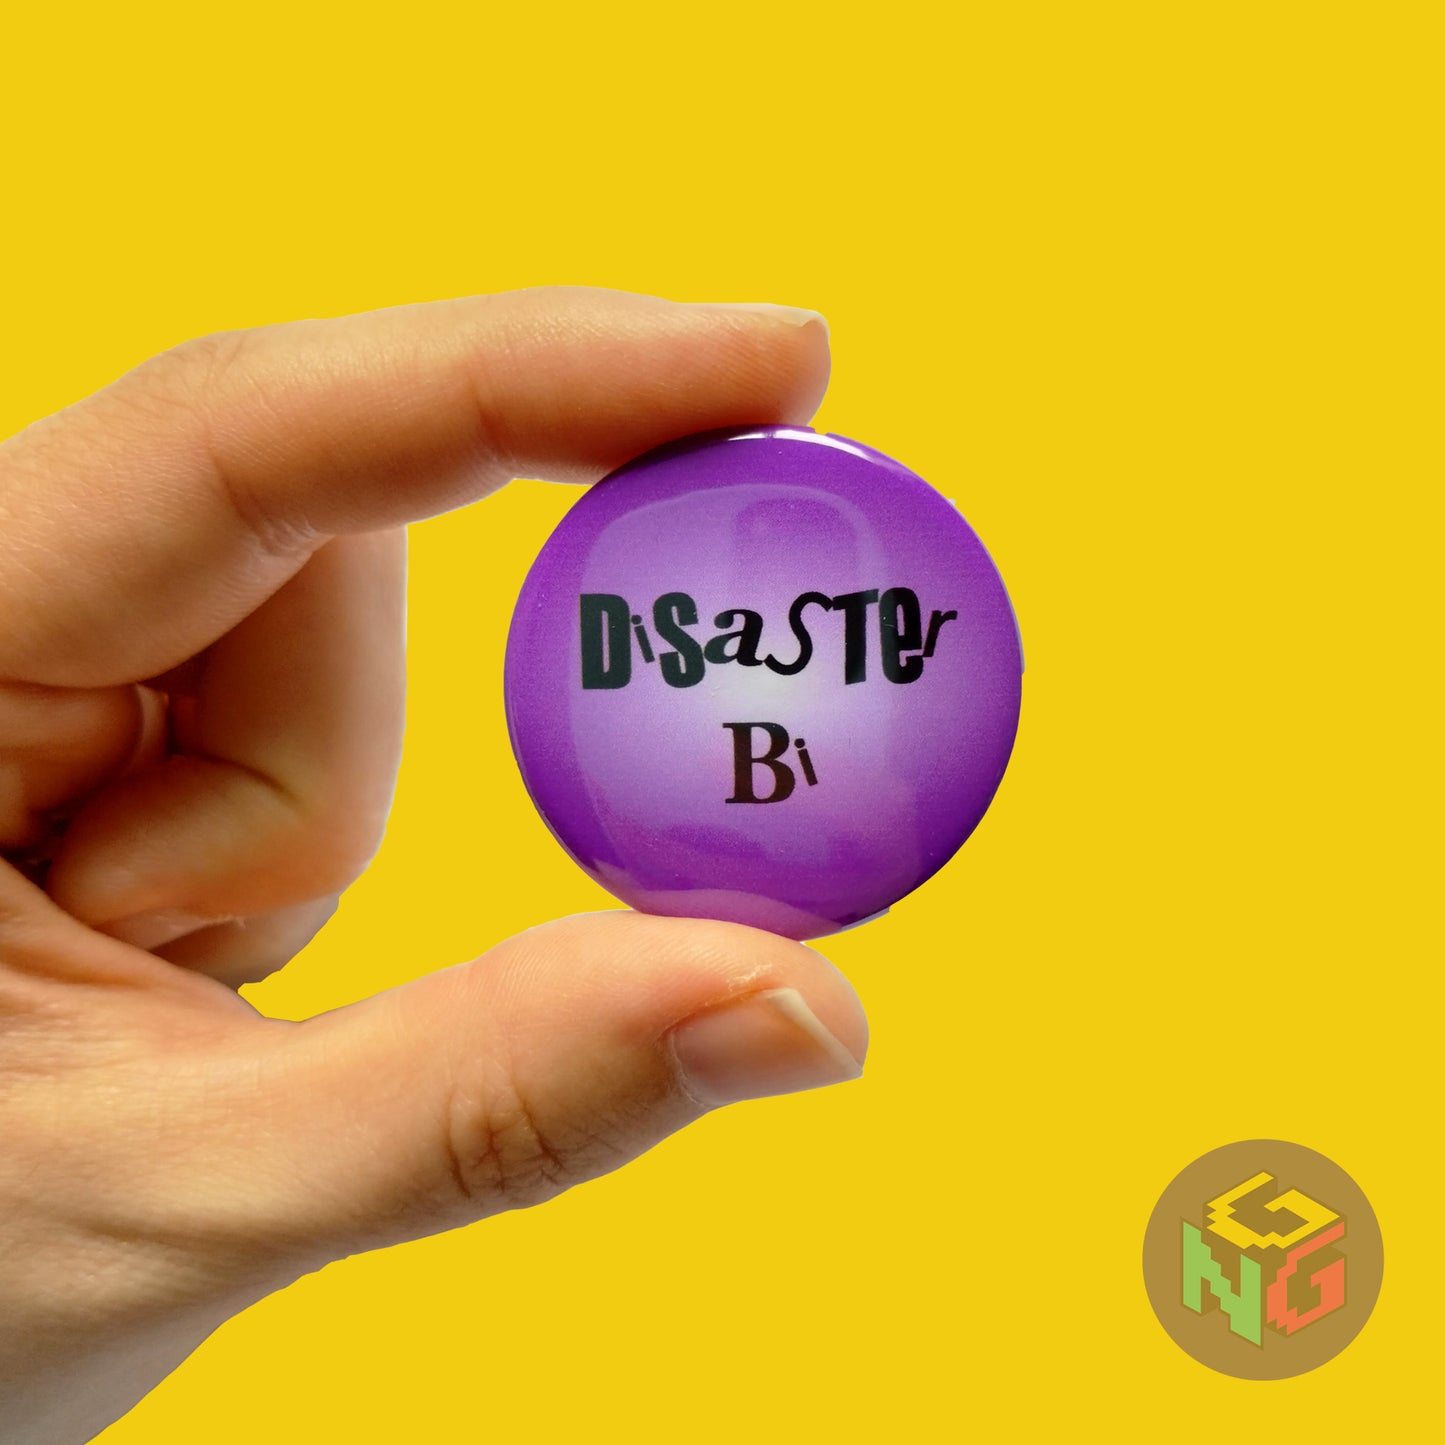 purple disaster bi button held in hand in front of yellow background